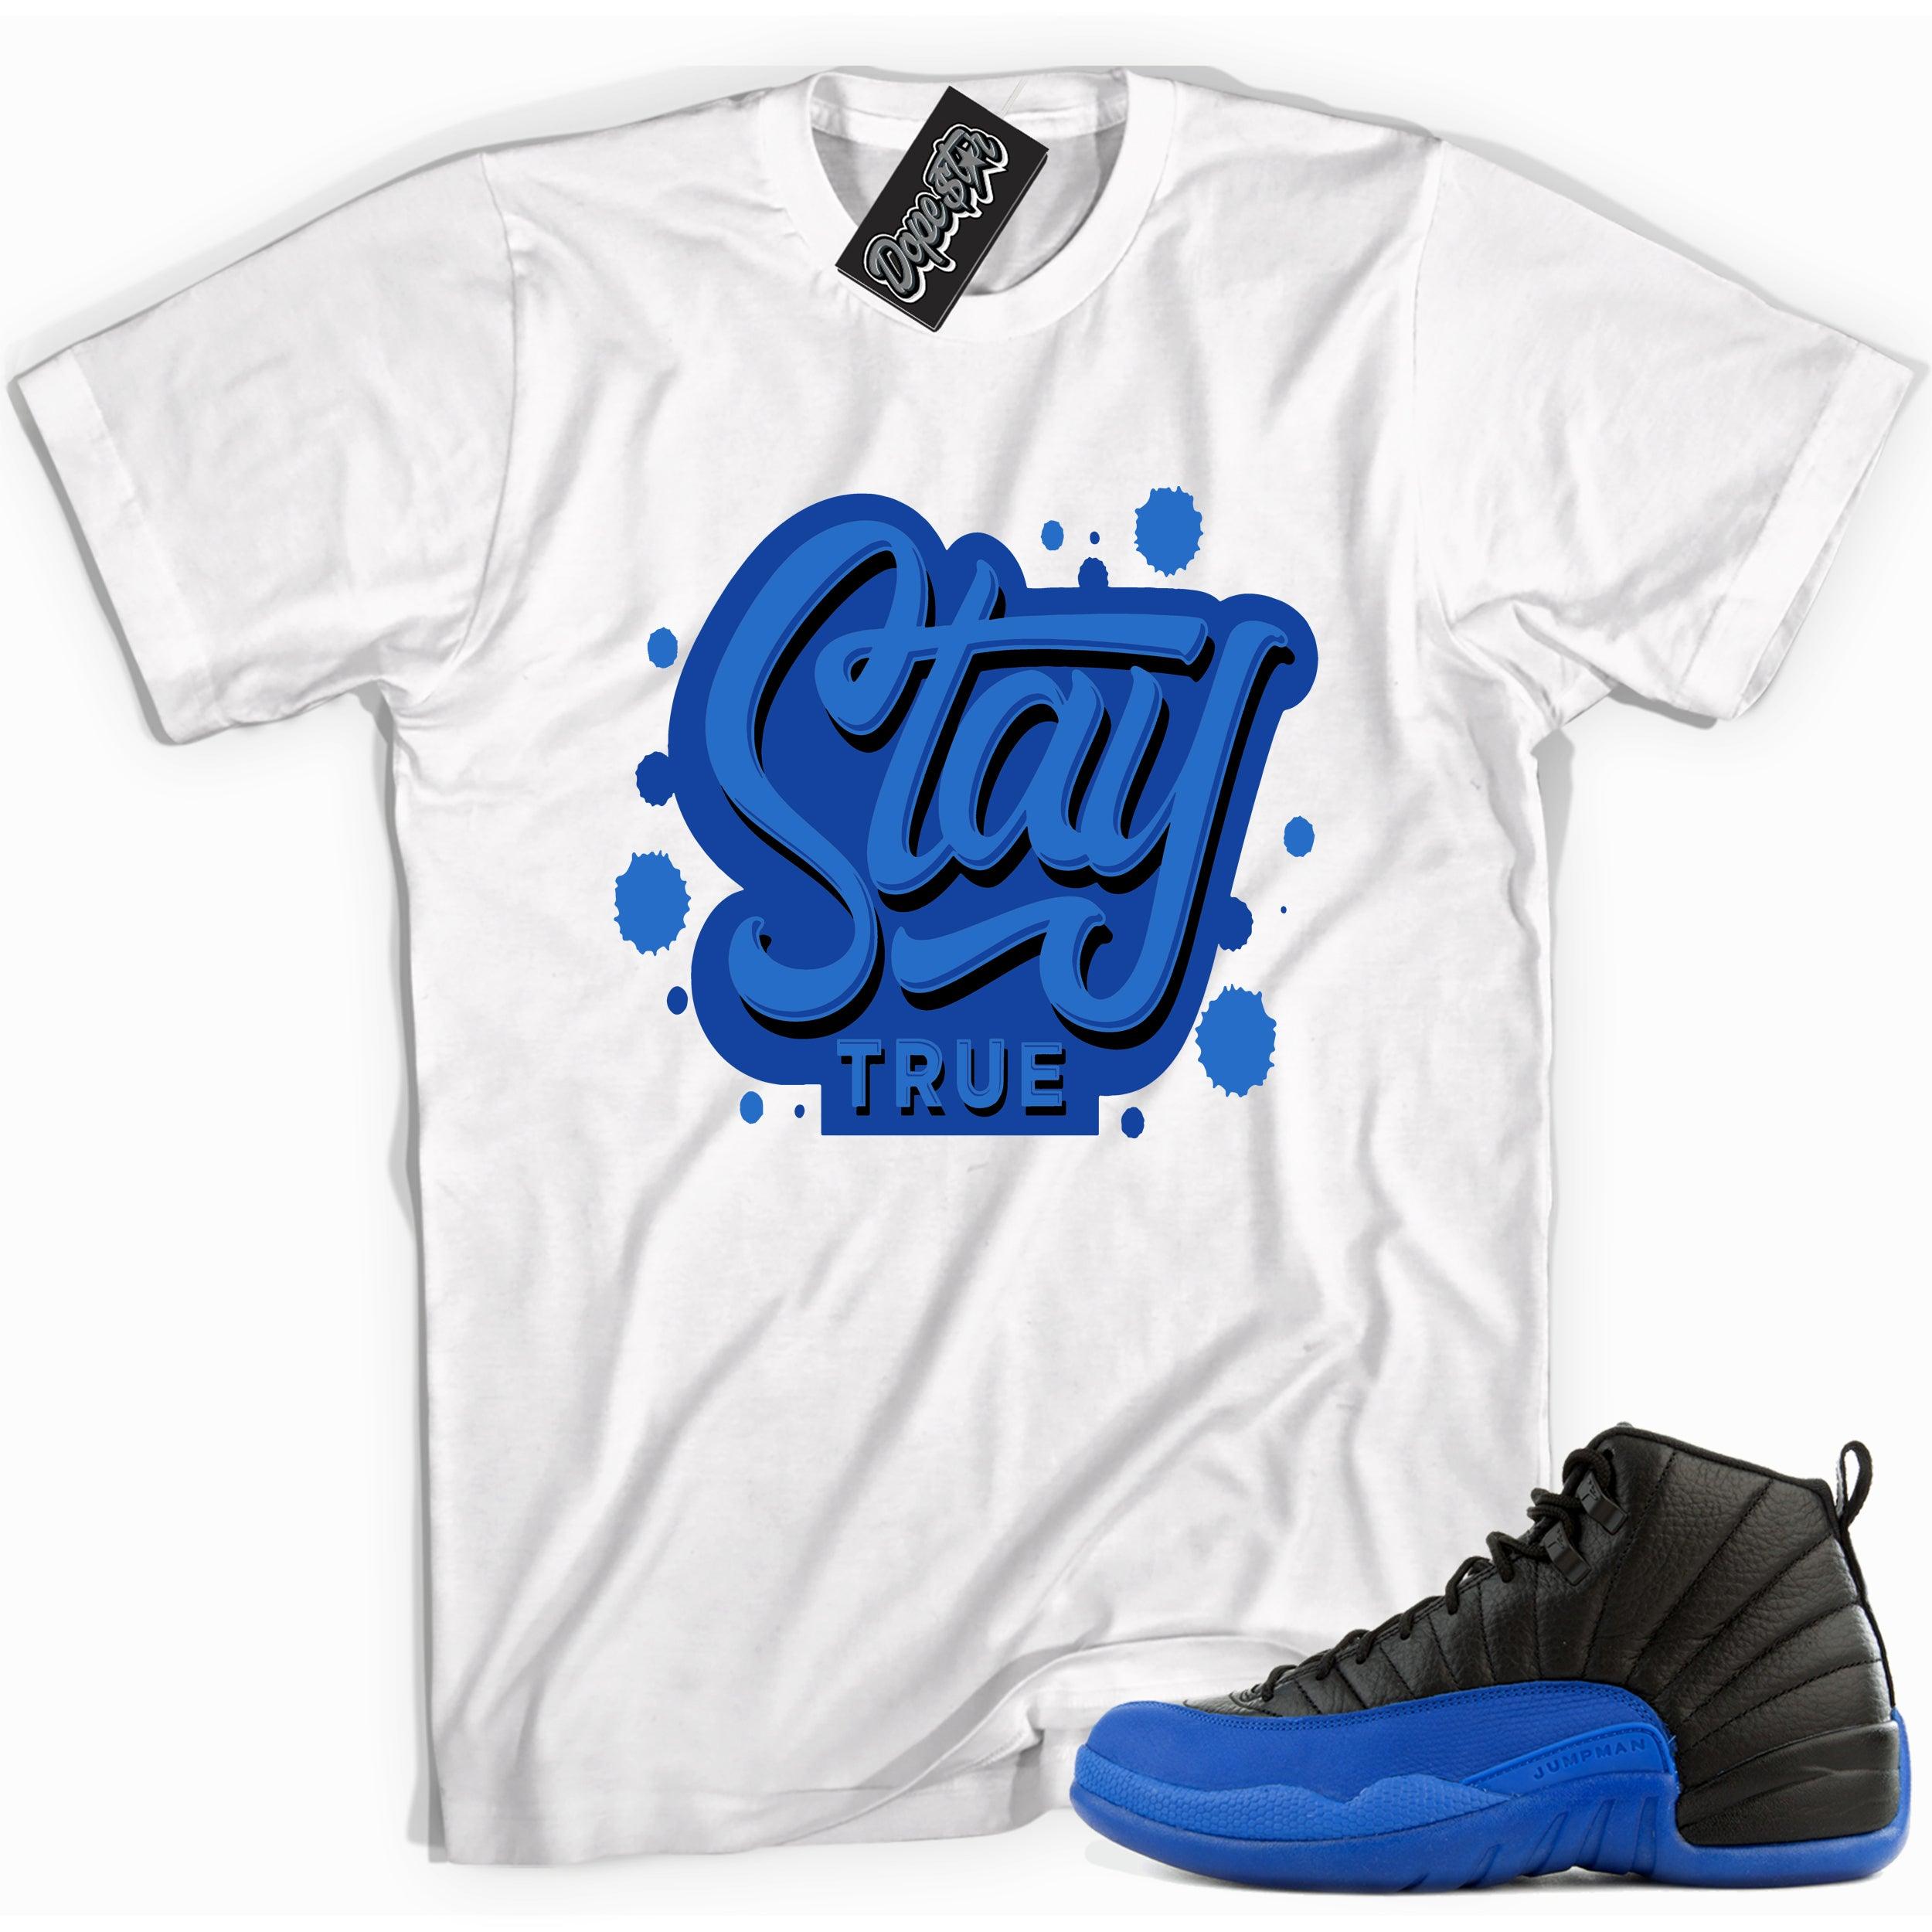 Cool white graphic tee with 'stay true' print, that perfectly matches Air Jordan 12 Retro Black Game Royal sneakers.